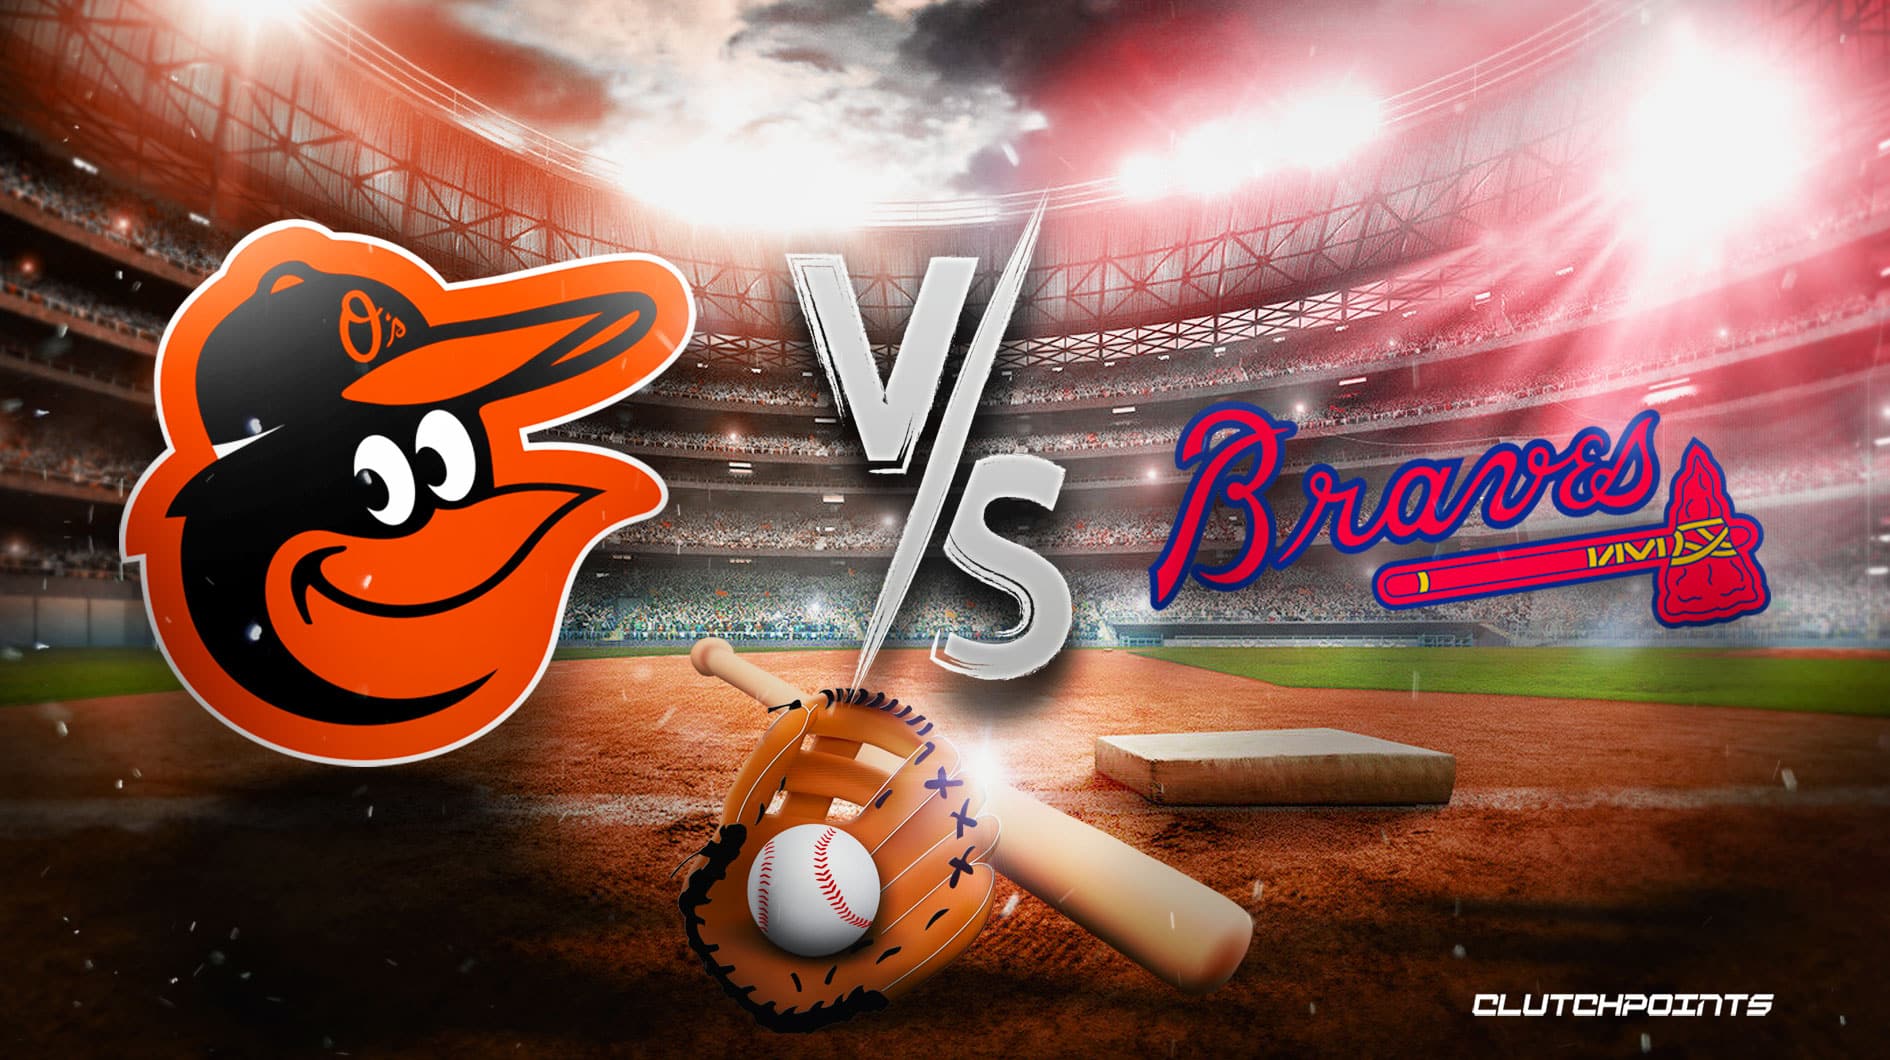 MLB Odds OriolesBraves prediction, pick, how to watch